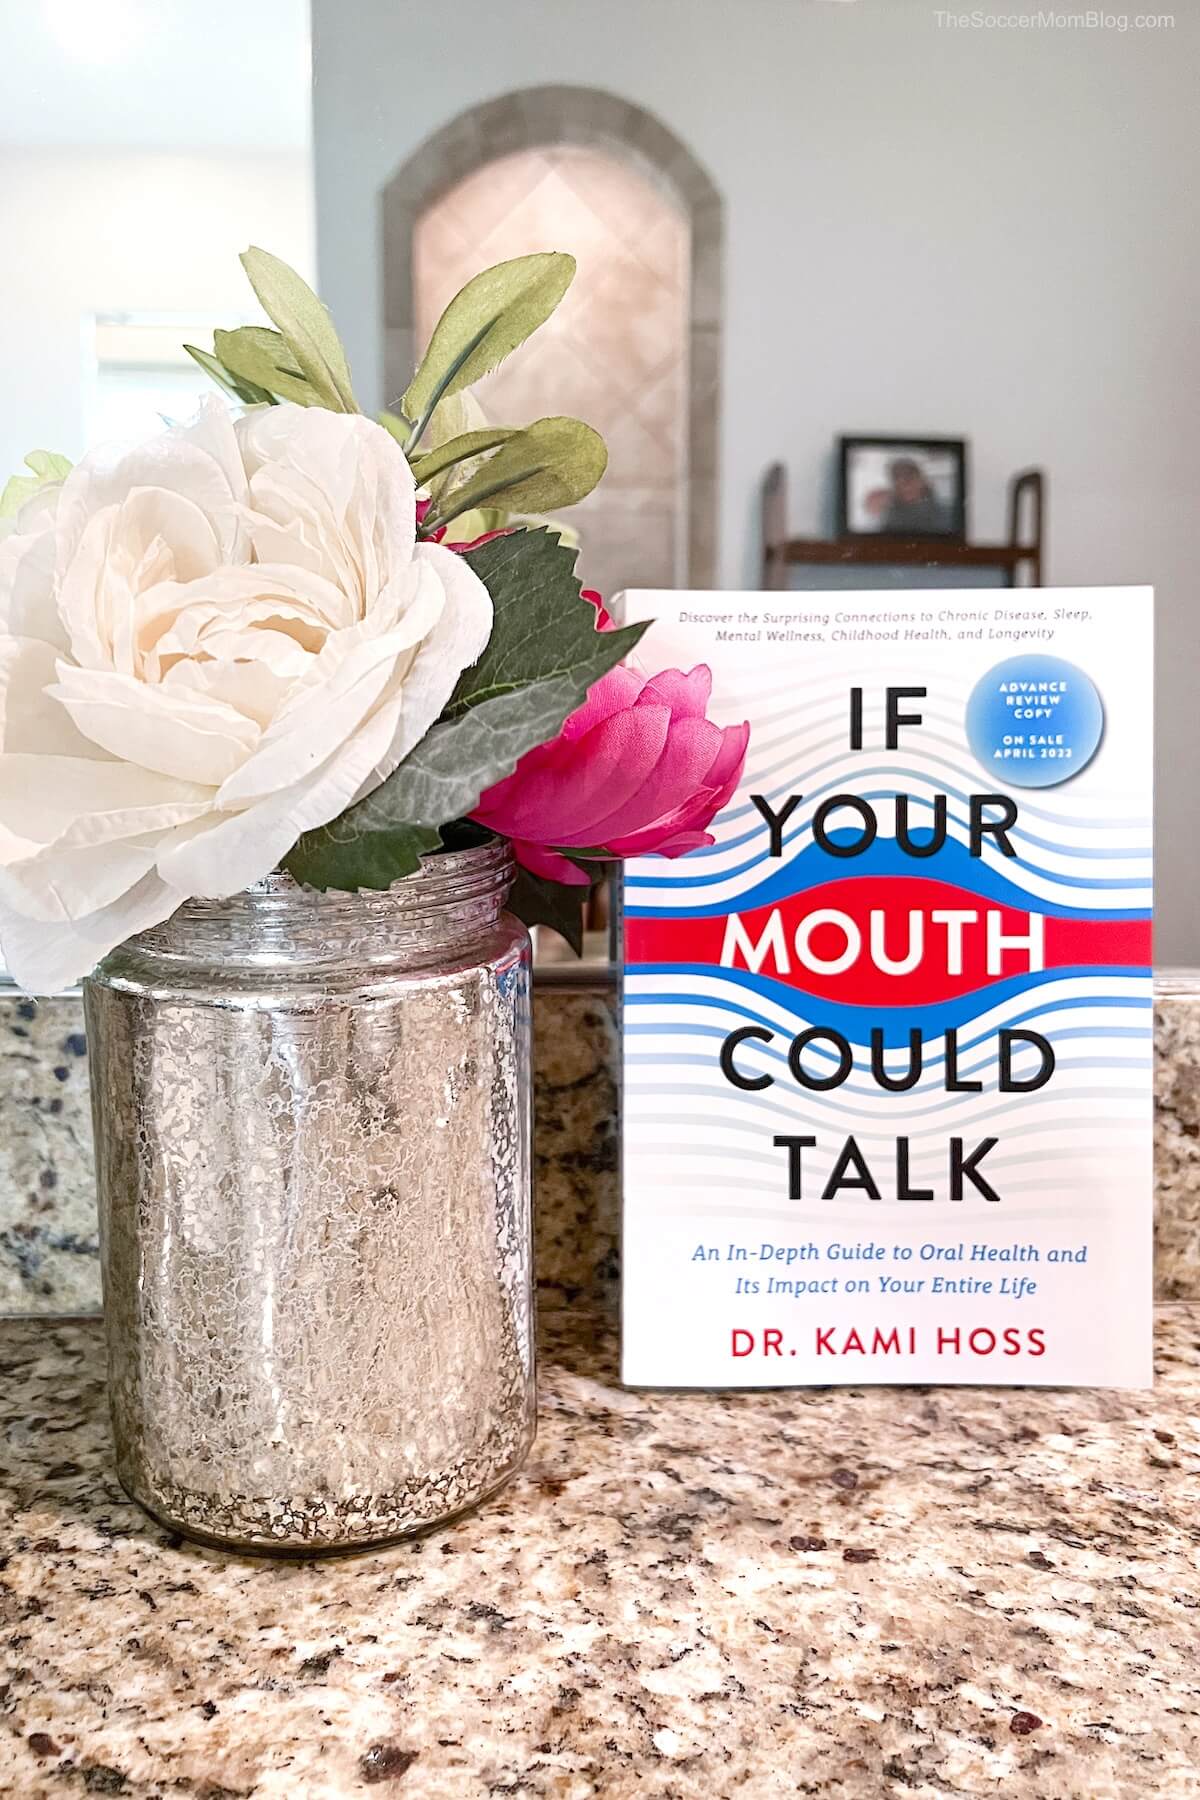 flowers on bathroom counter and book titled "If Your Mouth Could Talk"